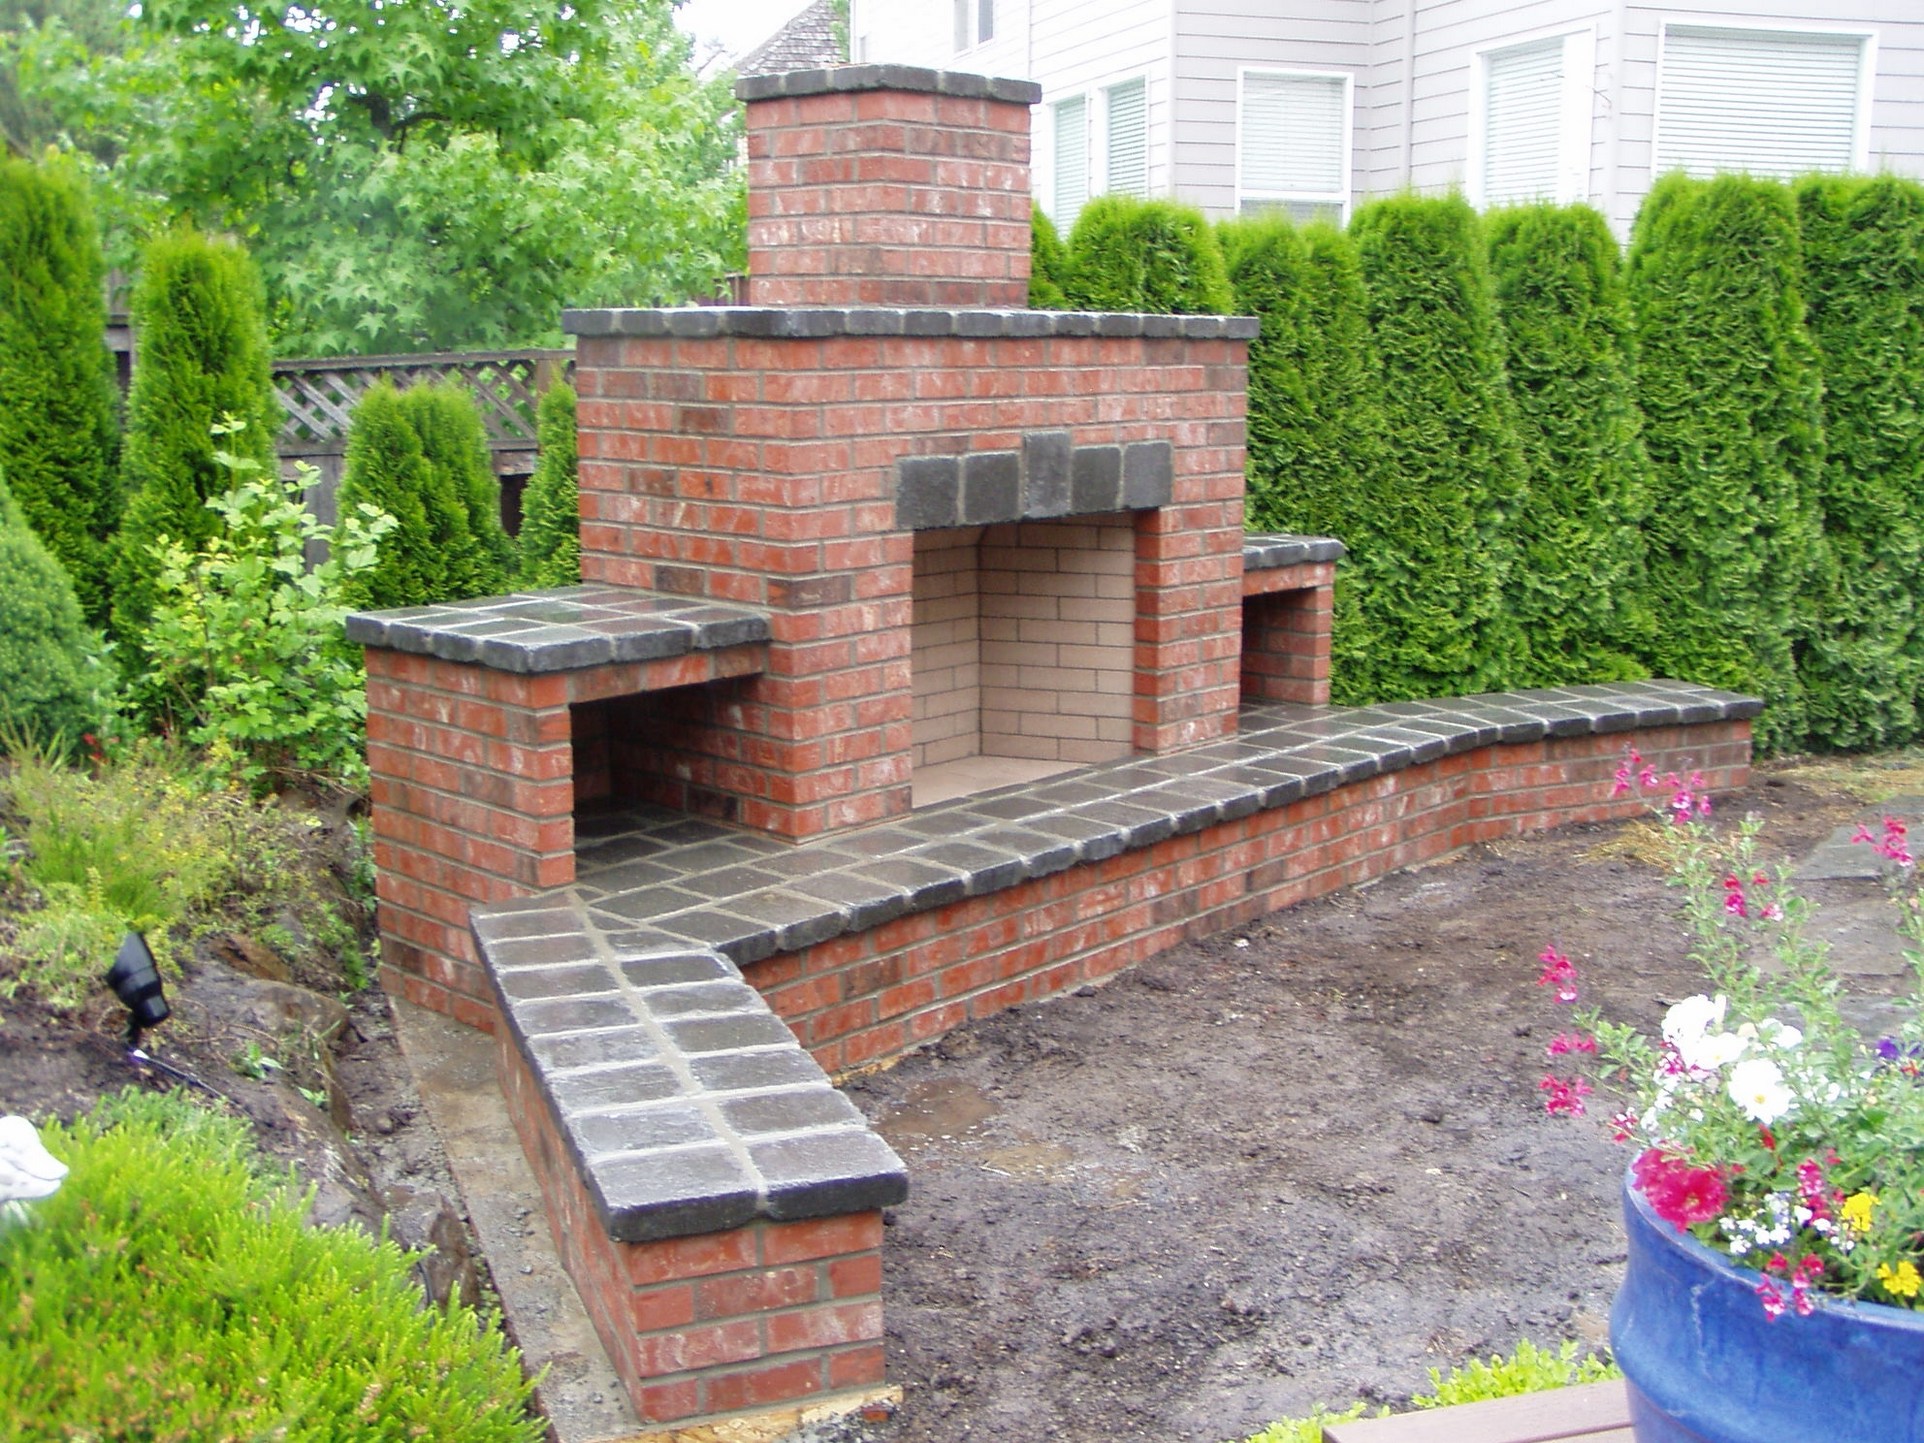 How to build an outdoor fireplace - Step-by-step guide